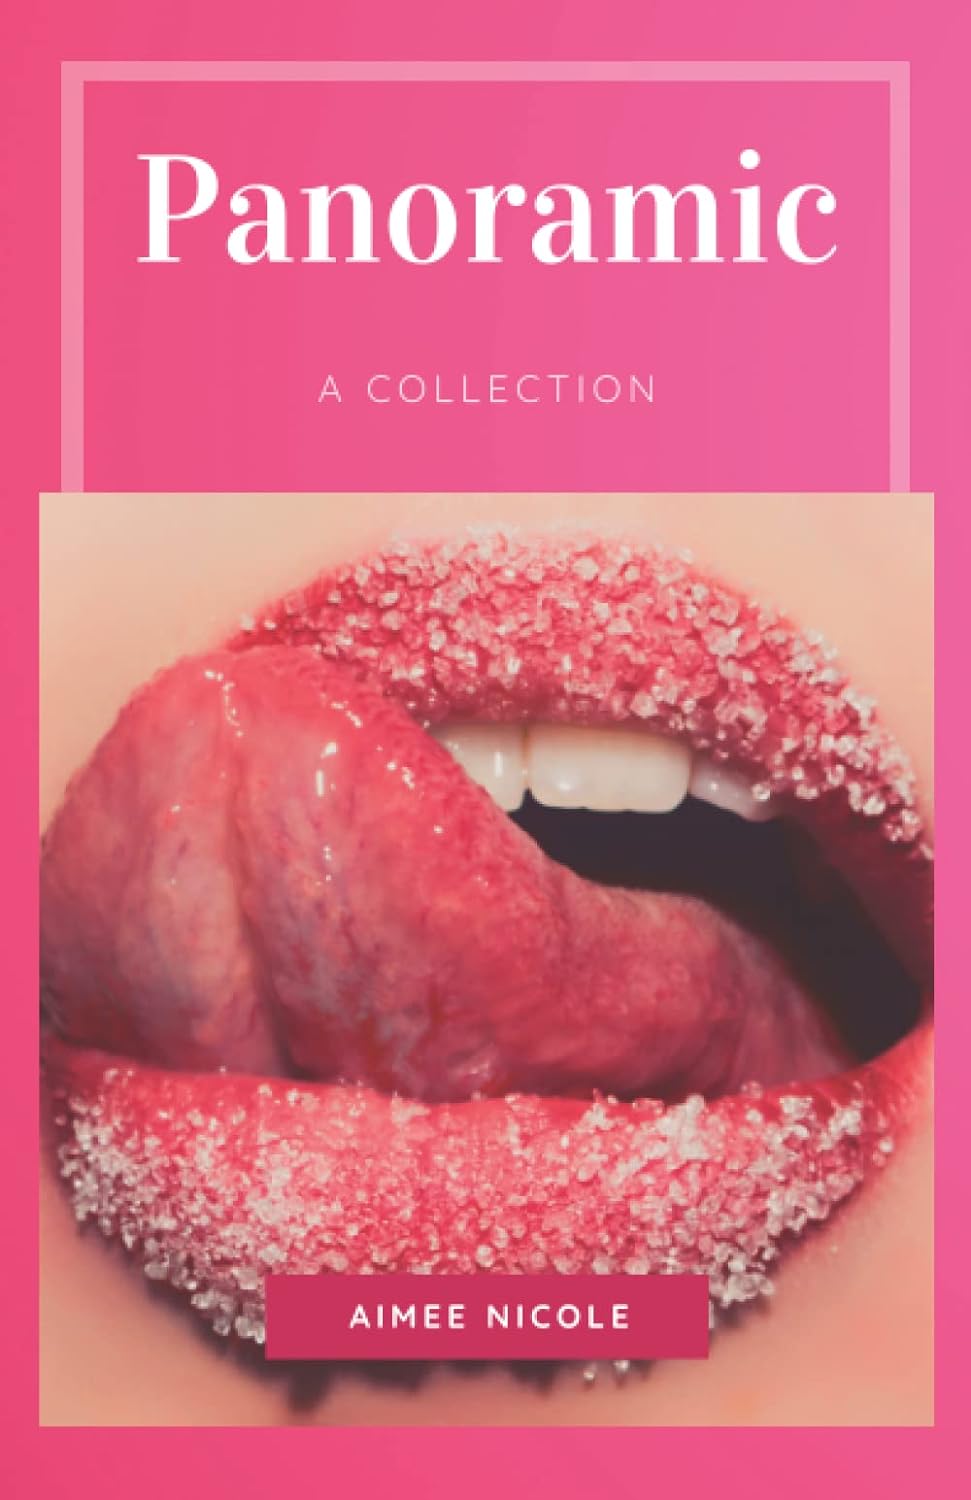 Panroamic poetry collection by Aimee Nicole book cover with image of toungue licking sugar off of lips.